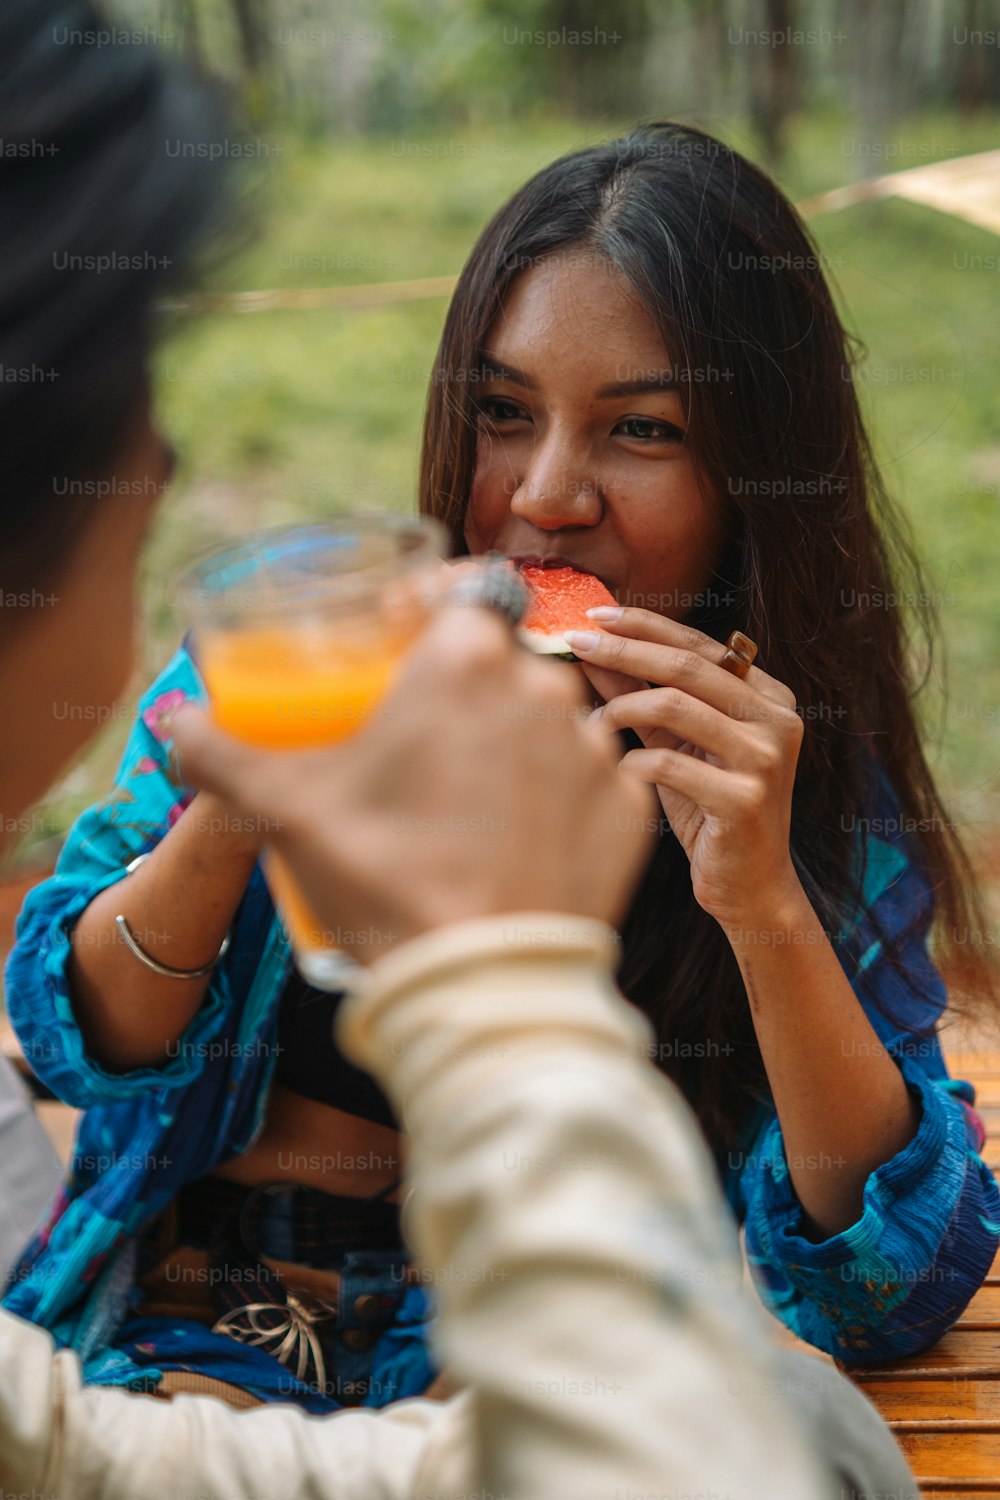 a woman eating a piece of watermelon and drinking a glass of orange juice